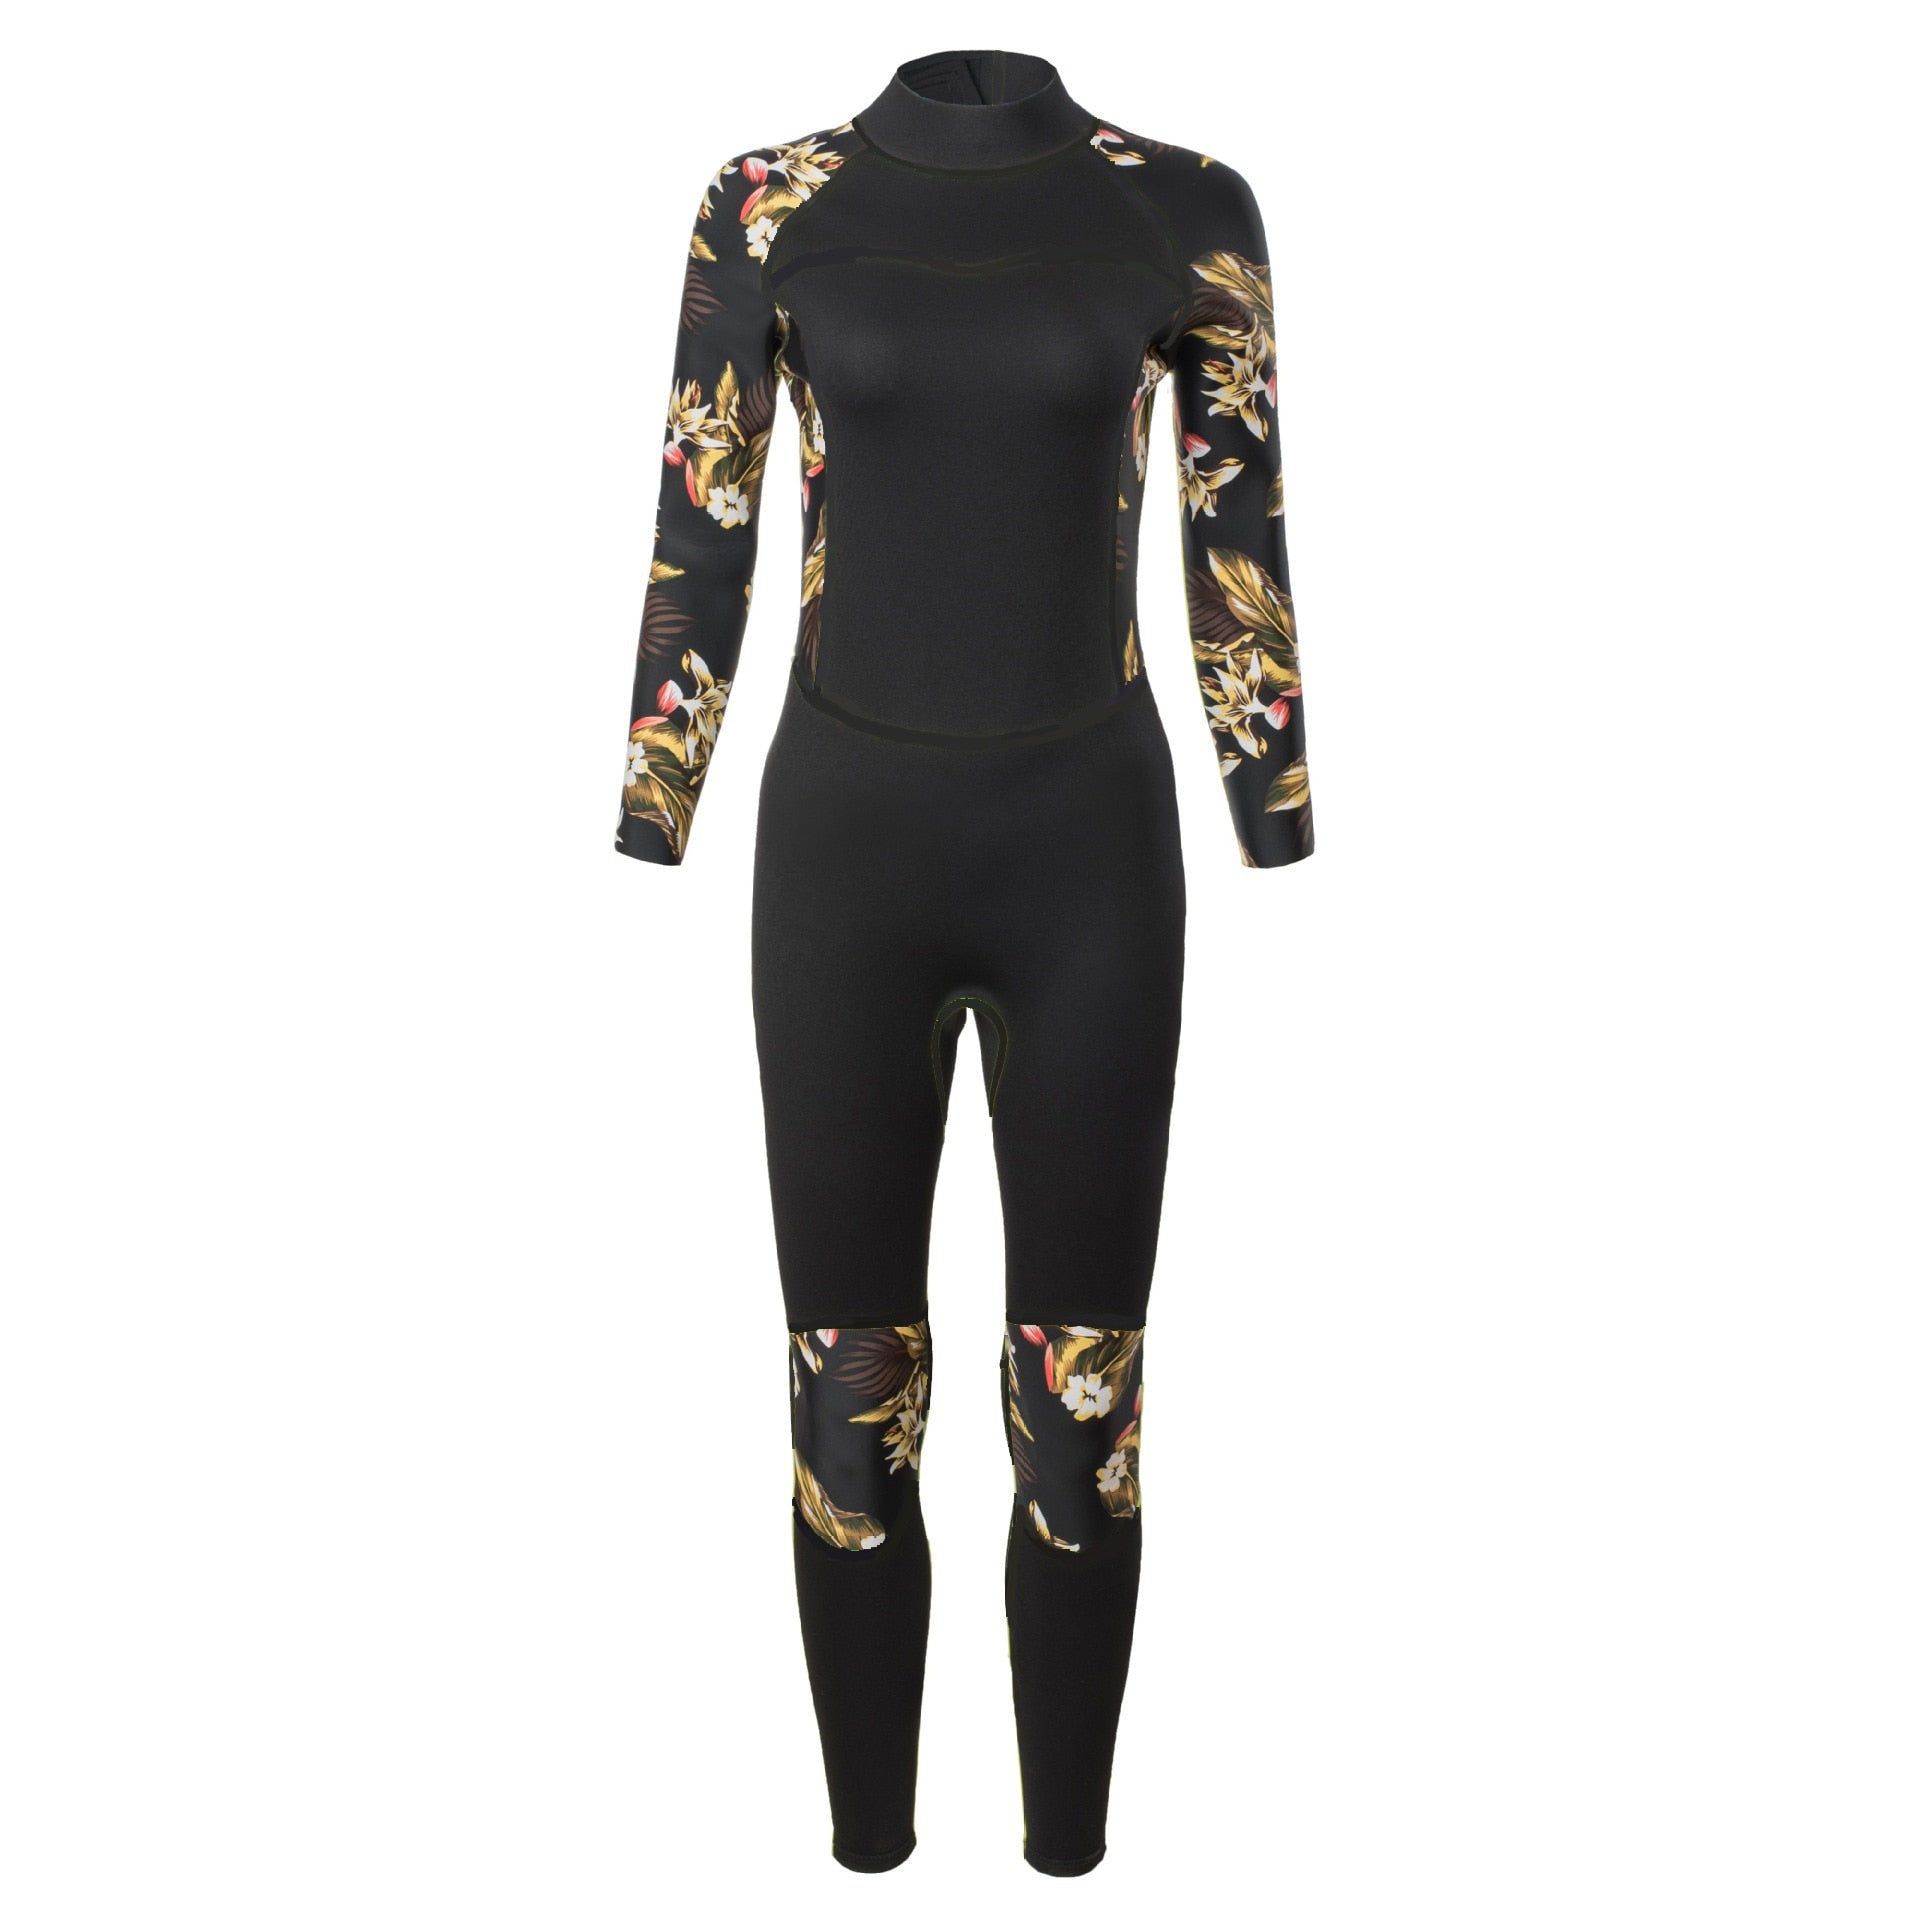 Front view of a 2mm neoprene women's full-body diving wetsuit for enhanced comfort and flexibility during underwater activities.